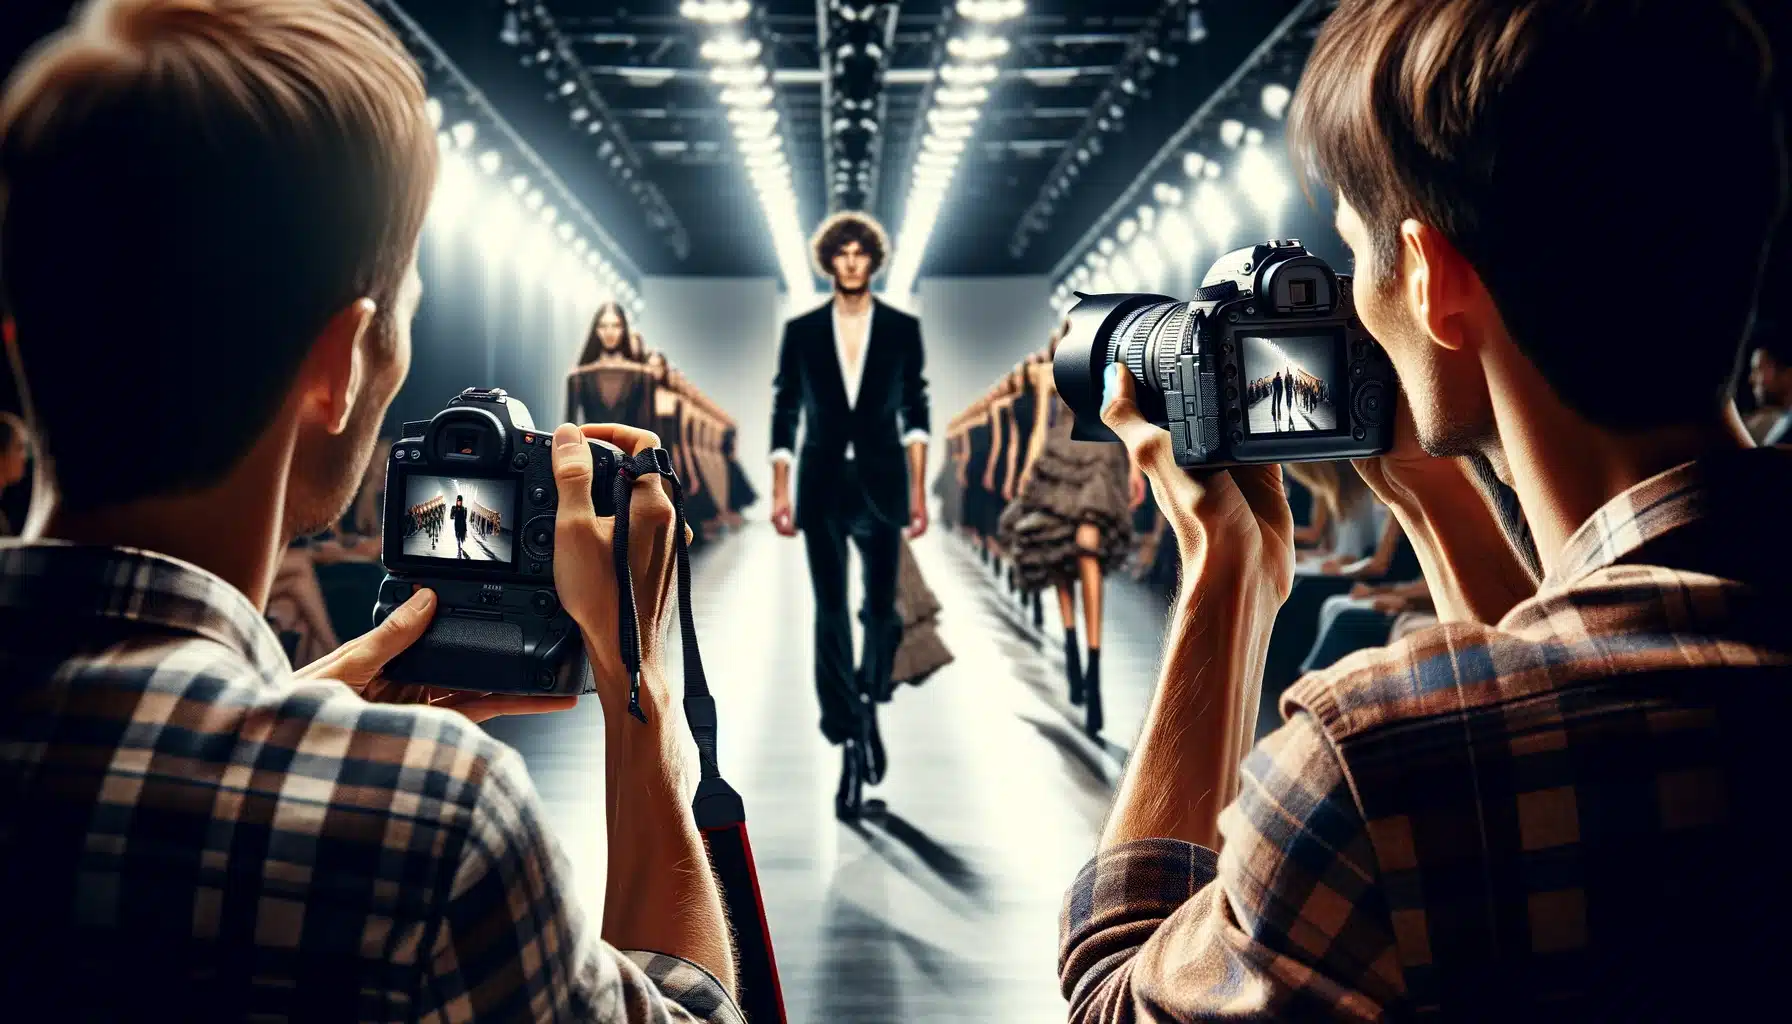 Two photographers at a fashion show, one with a DSLR and the other with a mirrorless camera, capturing models on a dramatically lit runway.